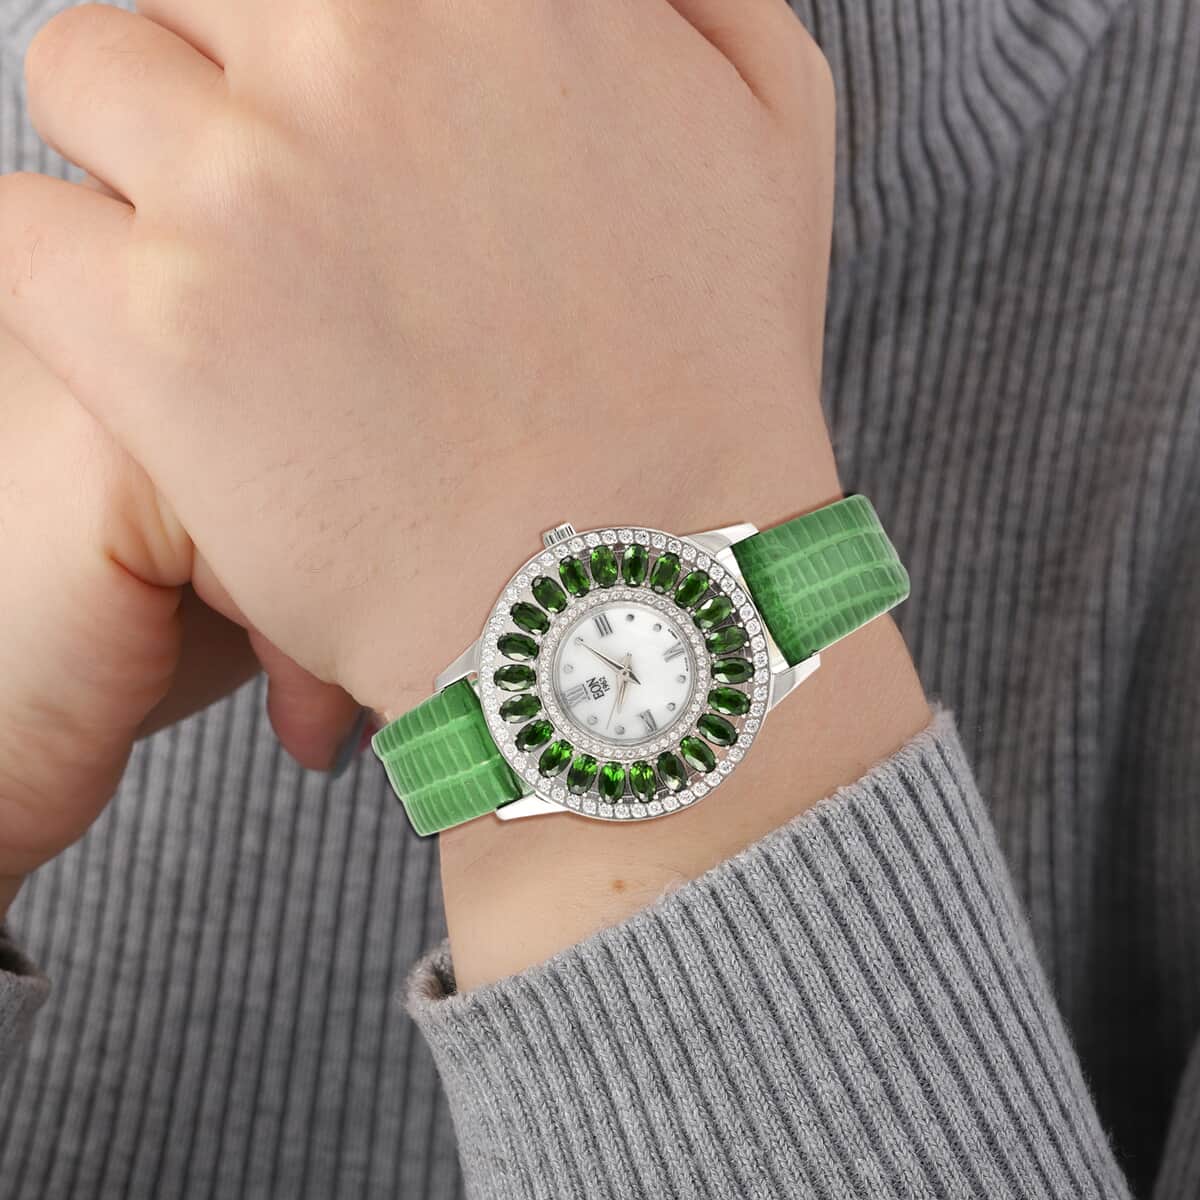 Eon 1962 Chrome Diopside Swiss Movement Stainless Steel Triple Halo MOP Dial Watch with Green Leather Band 7.00 ctw, Designer Leather Watch, Analog Luxury Wristwatch image number 2